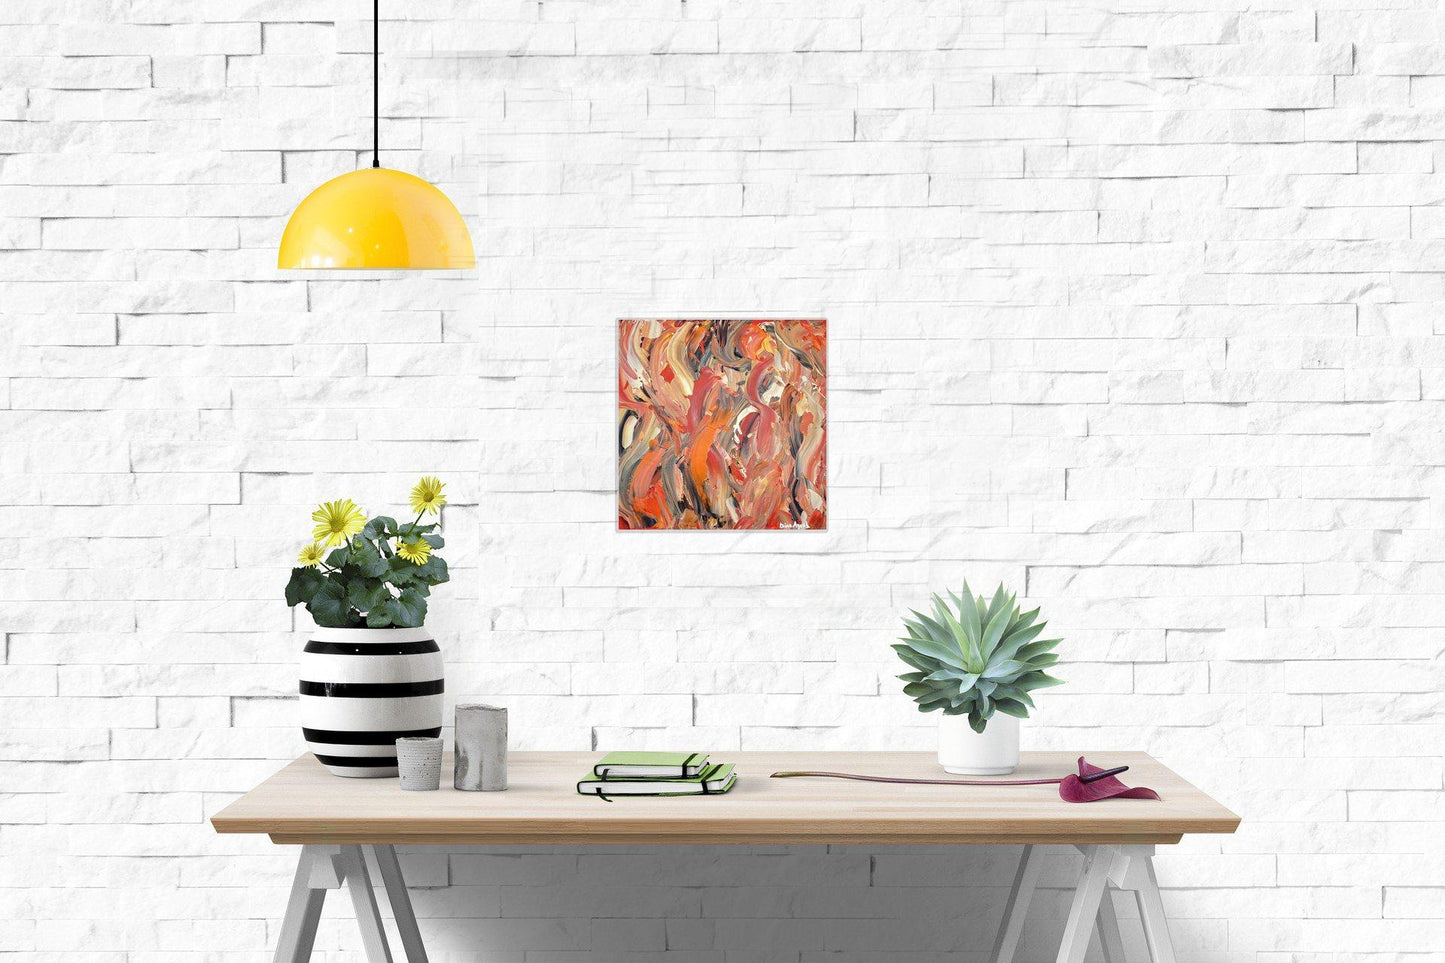 Abstract original acrylic painting in orange and red